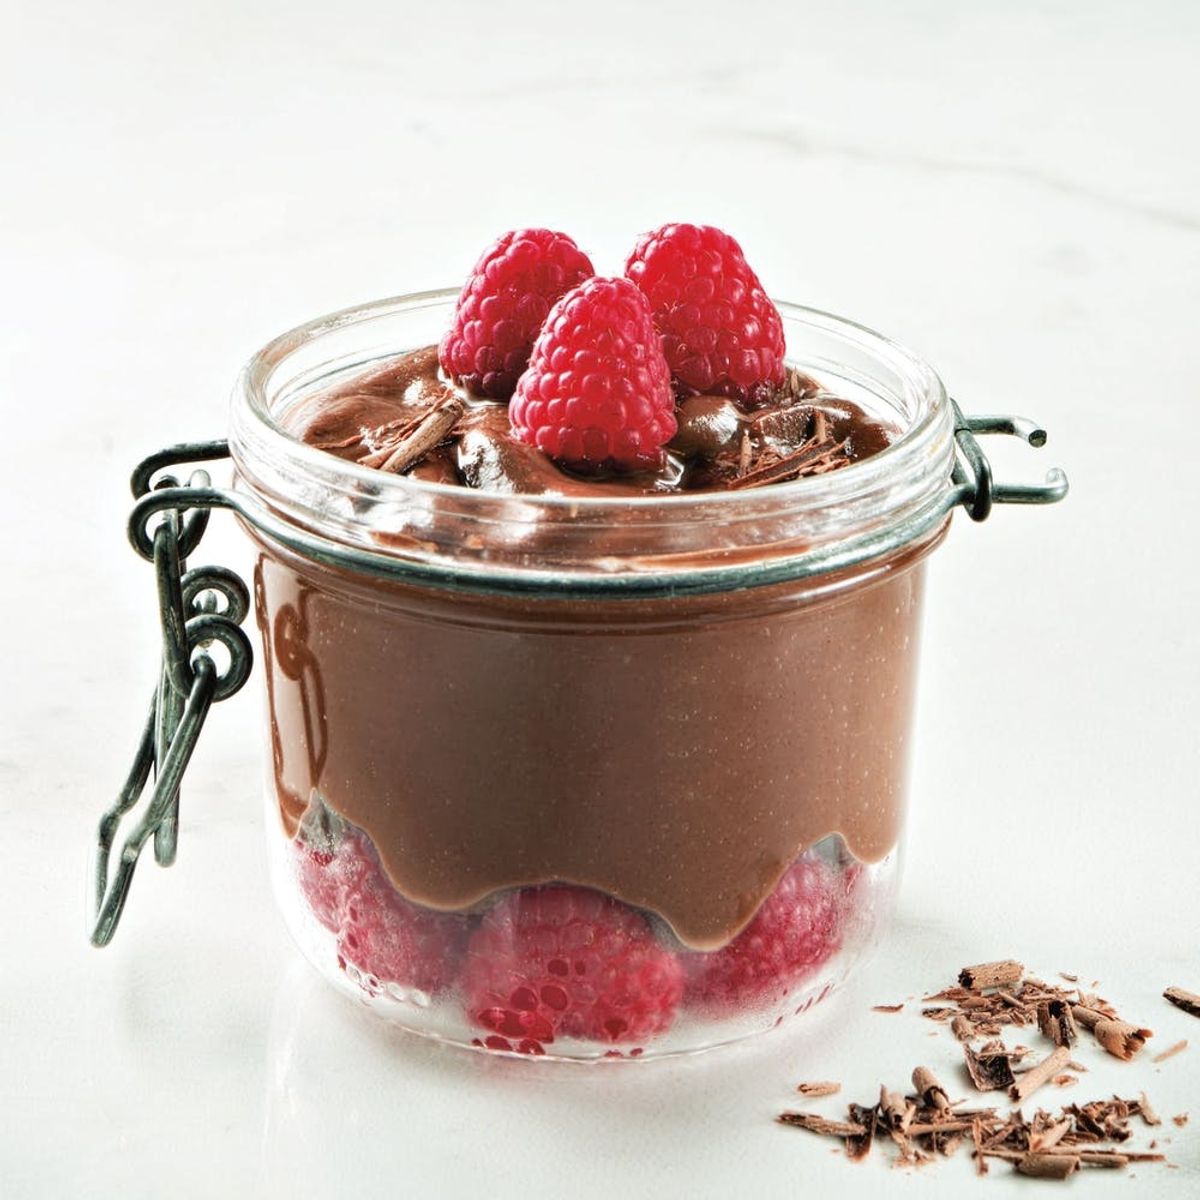 This Completely Vegan Chocolate Pudding (Made from Cauliflower) Is Too Weirdly Wonderful to Miss